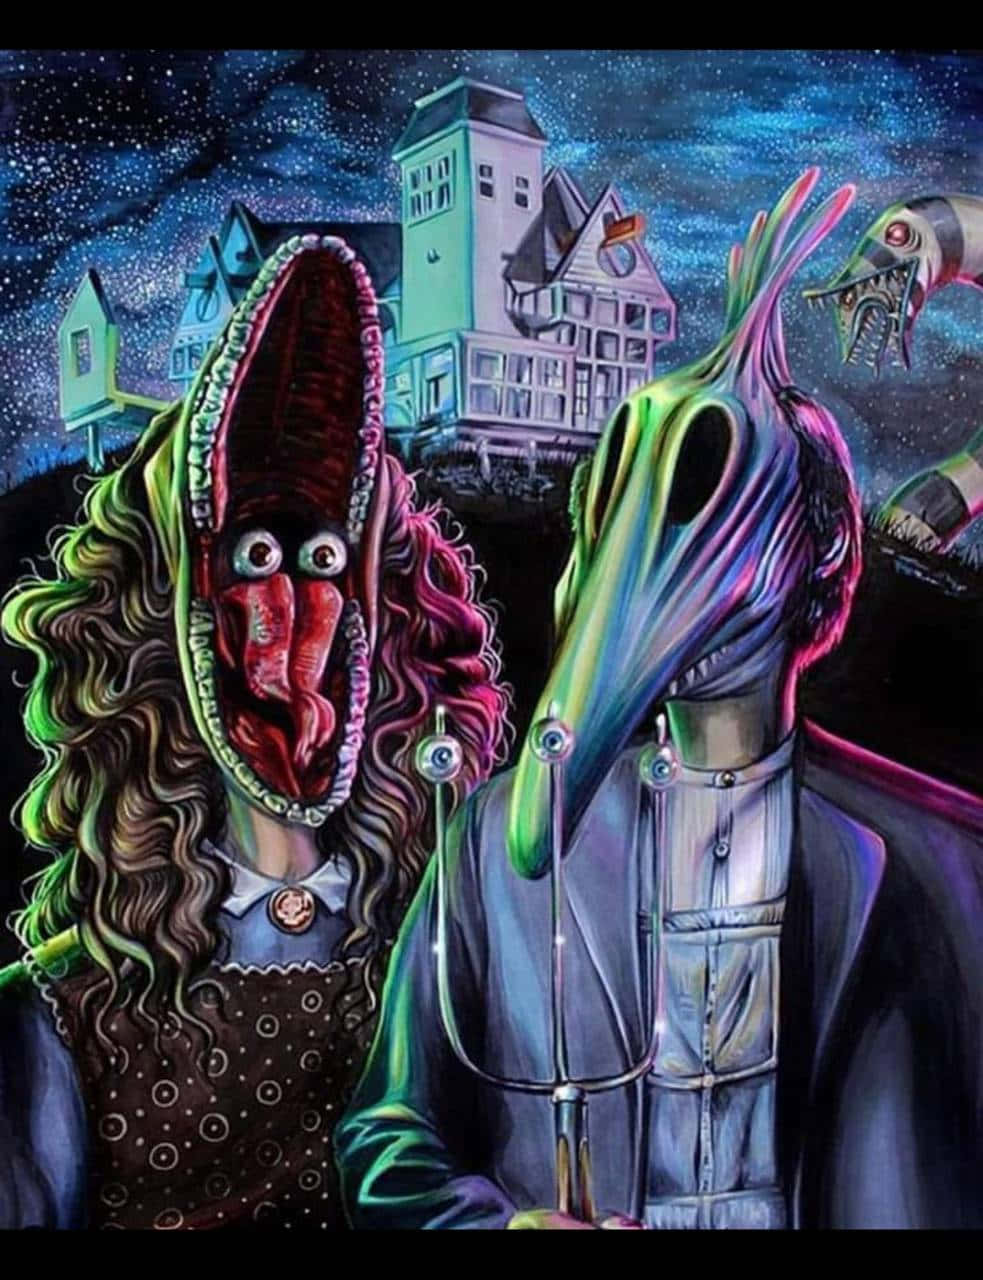 Behold the crazy world of Beetlejuice!